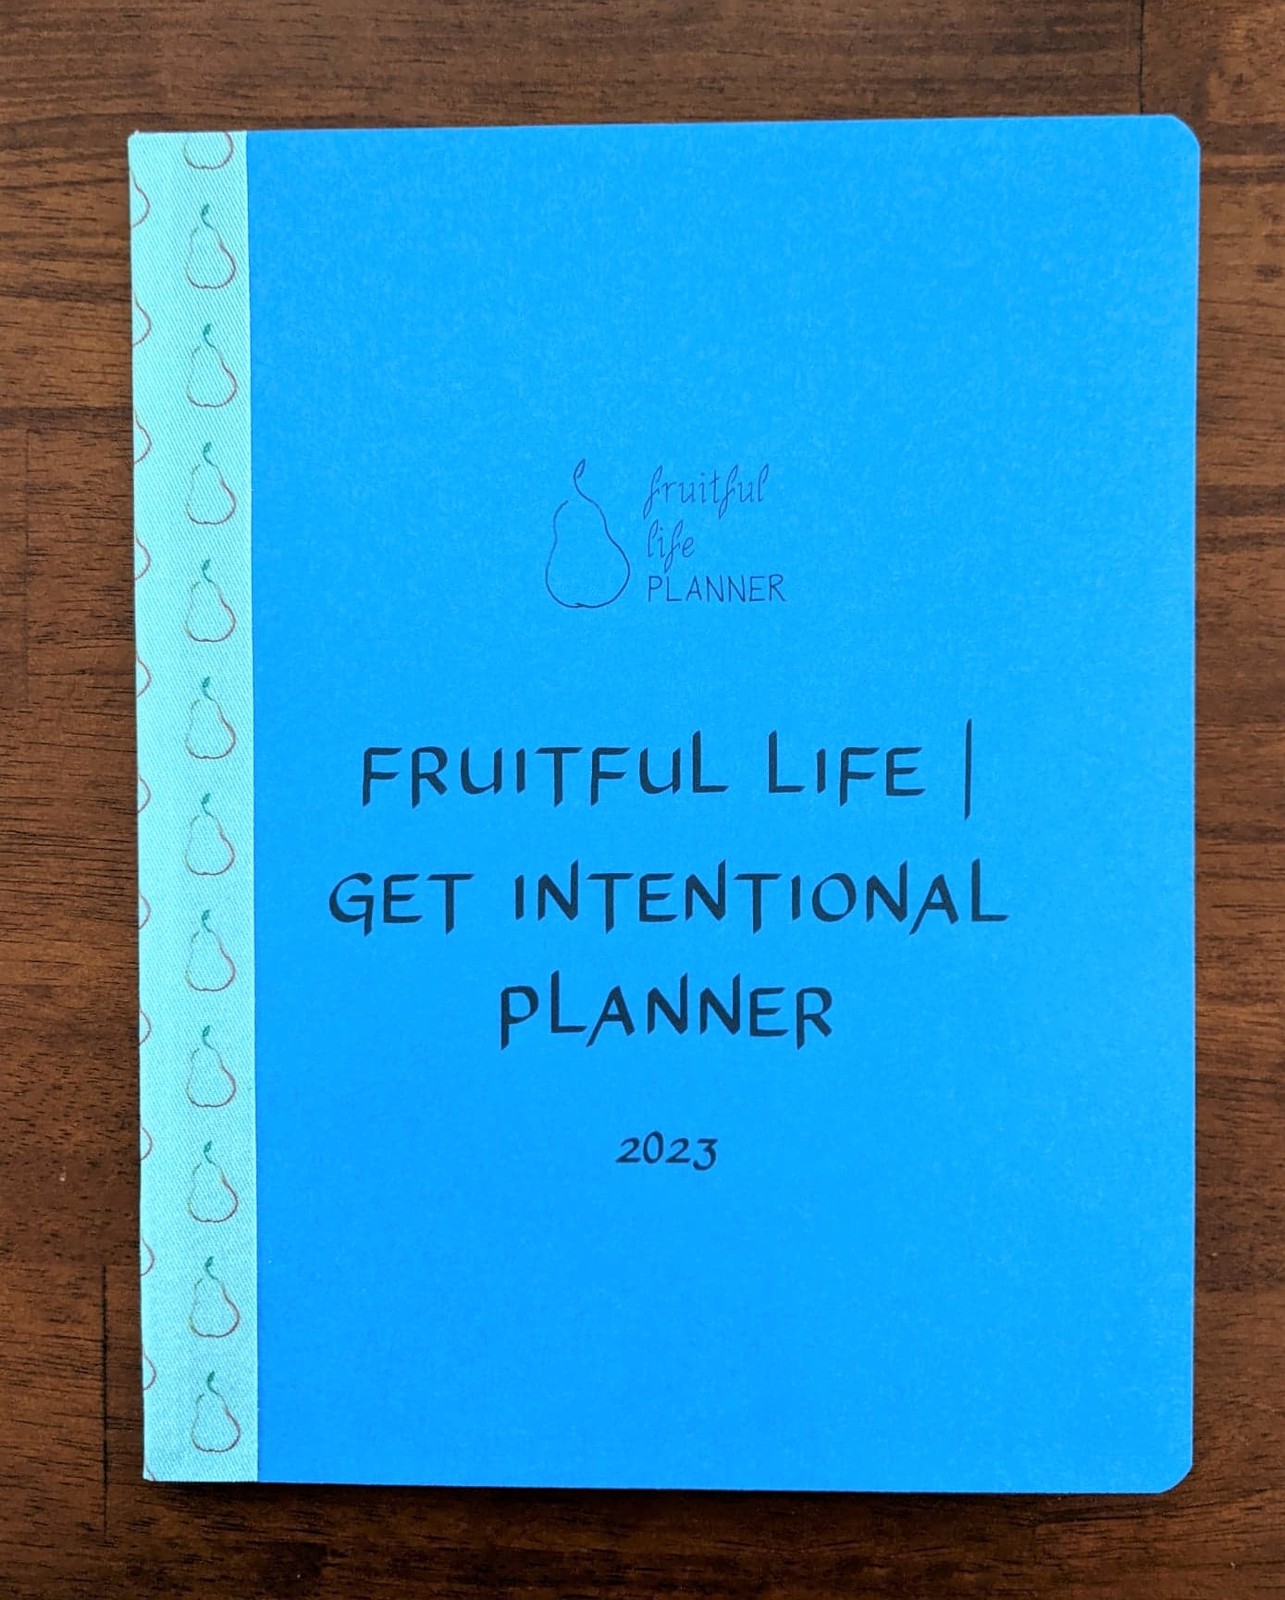 The Fruitful Life | Get Intentional Planner 2024 NOW AVAILABLE! - $37.00